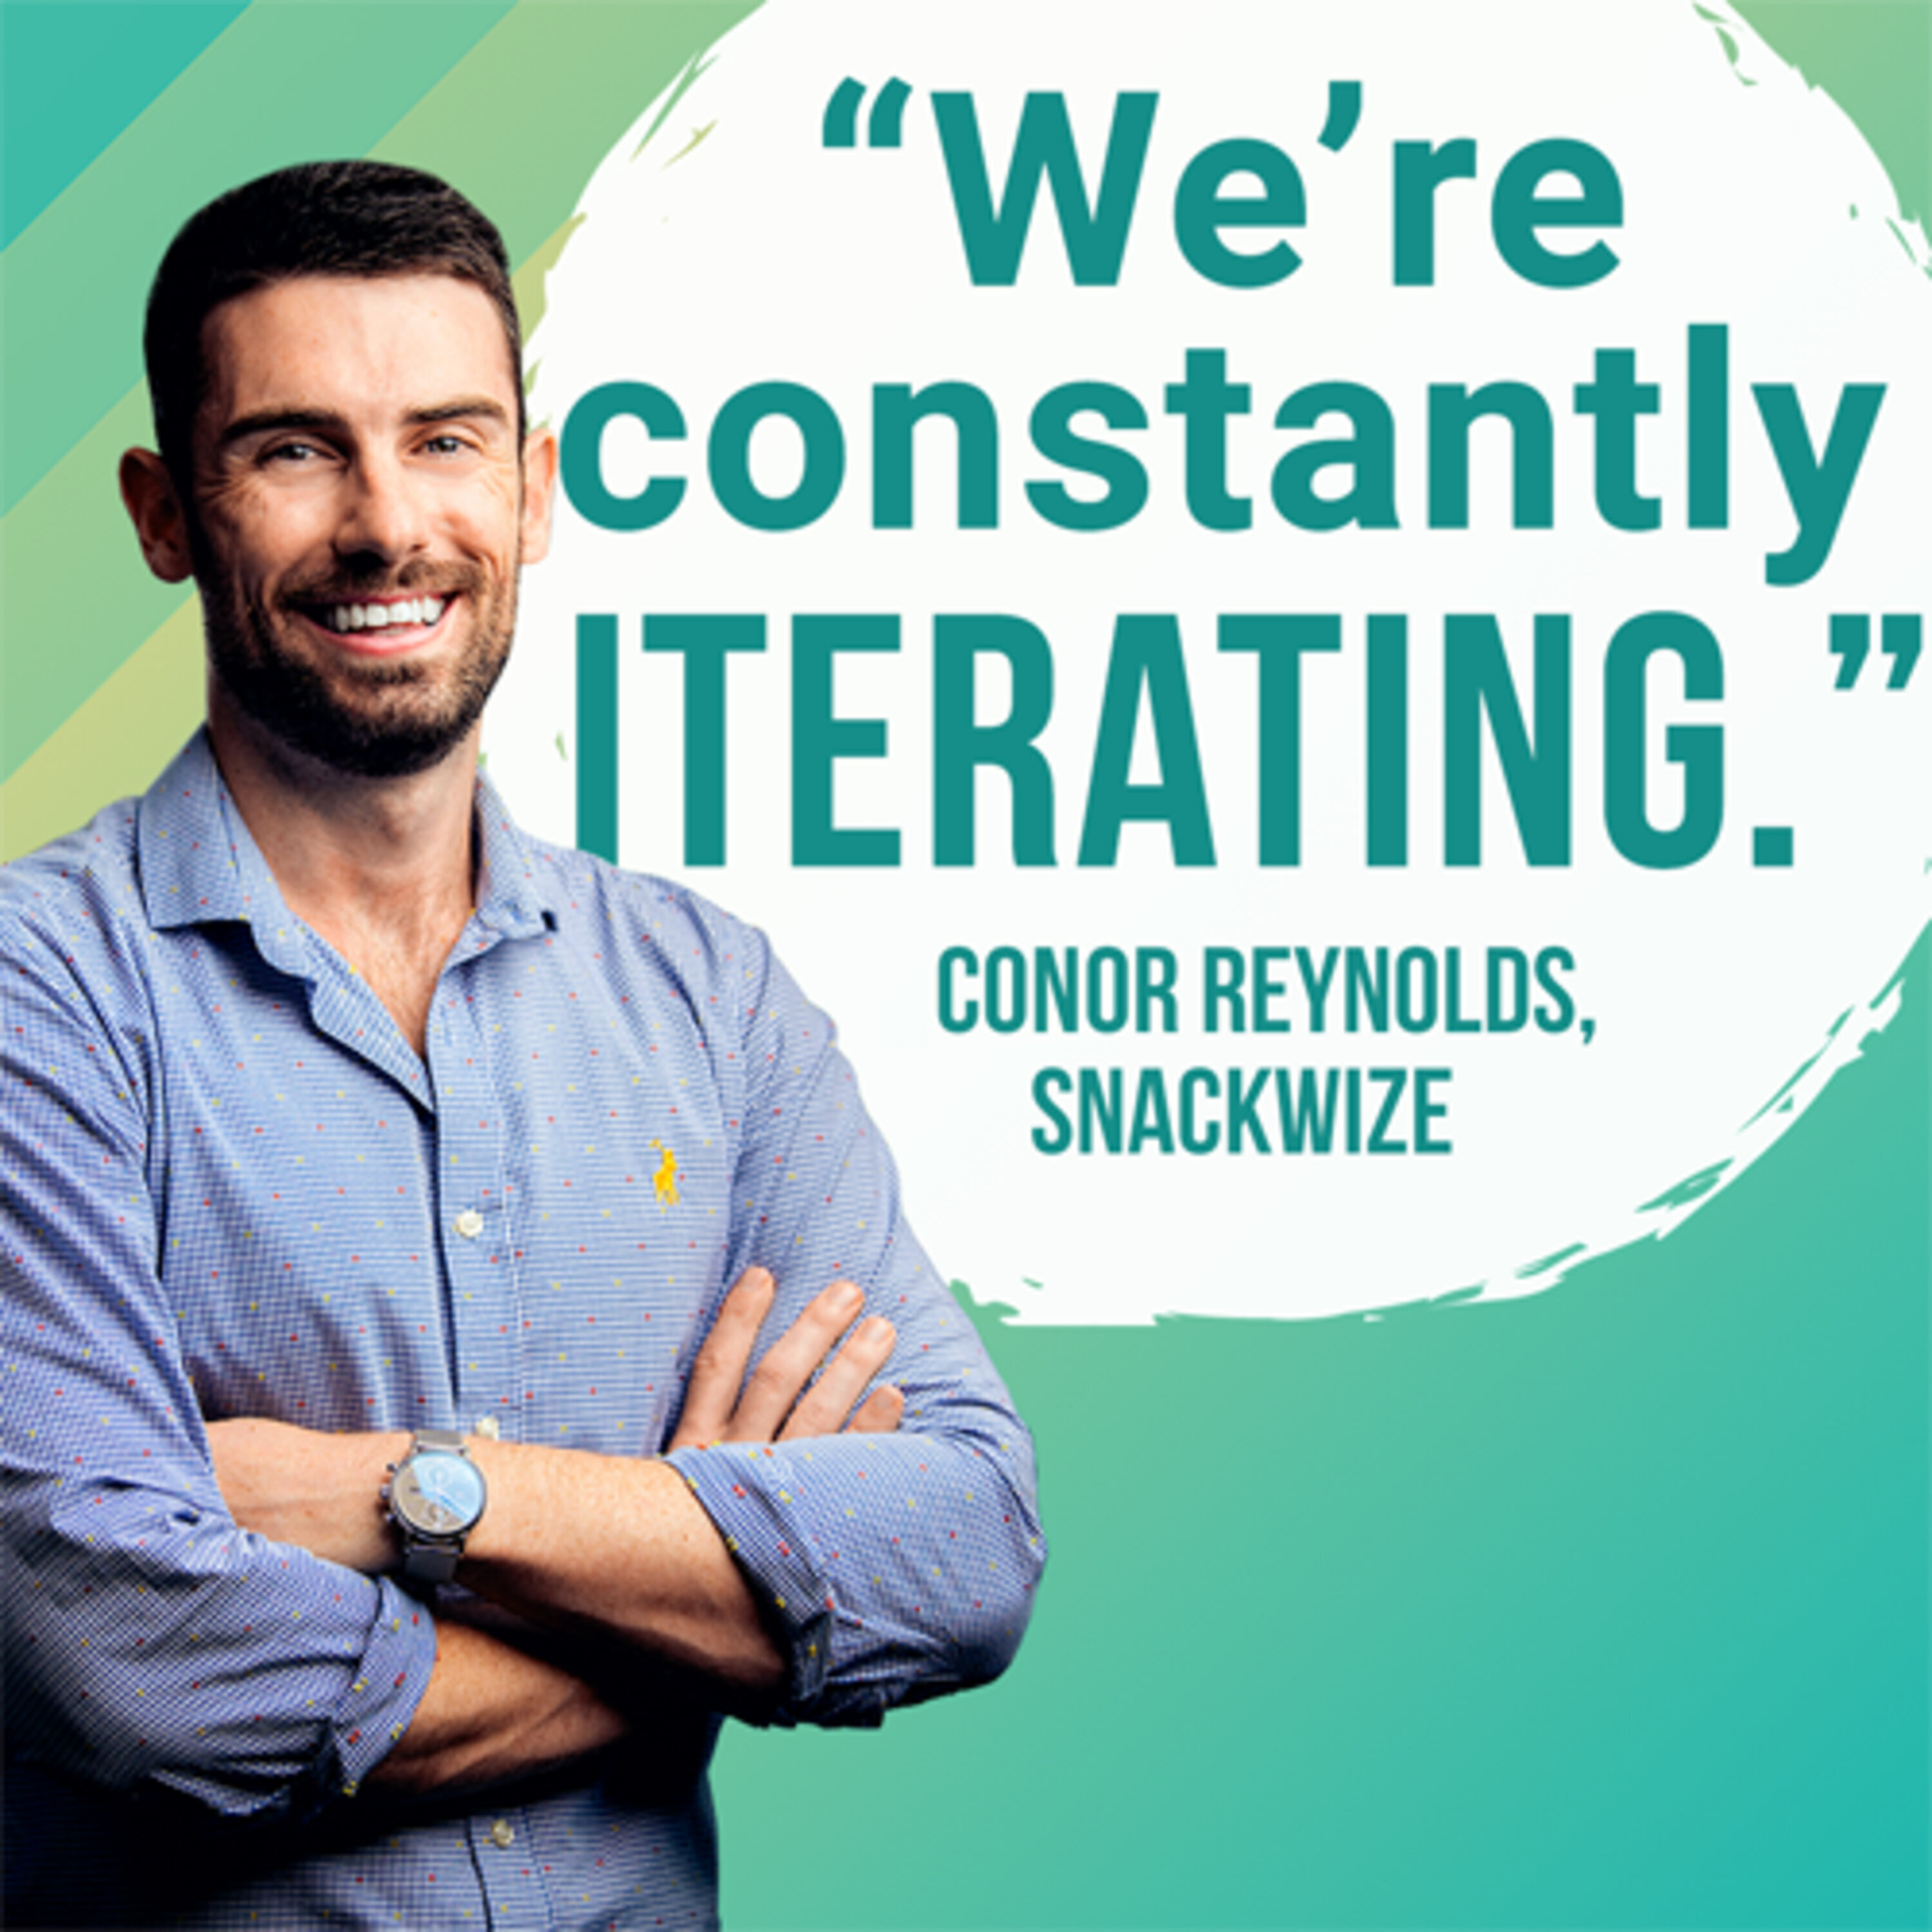 Snackwize founder Conor Reynolds on building a healthy business | #472